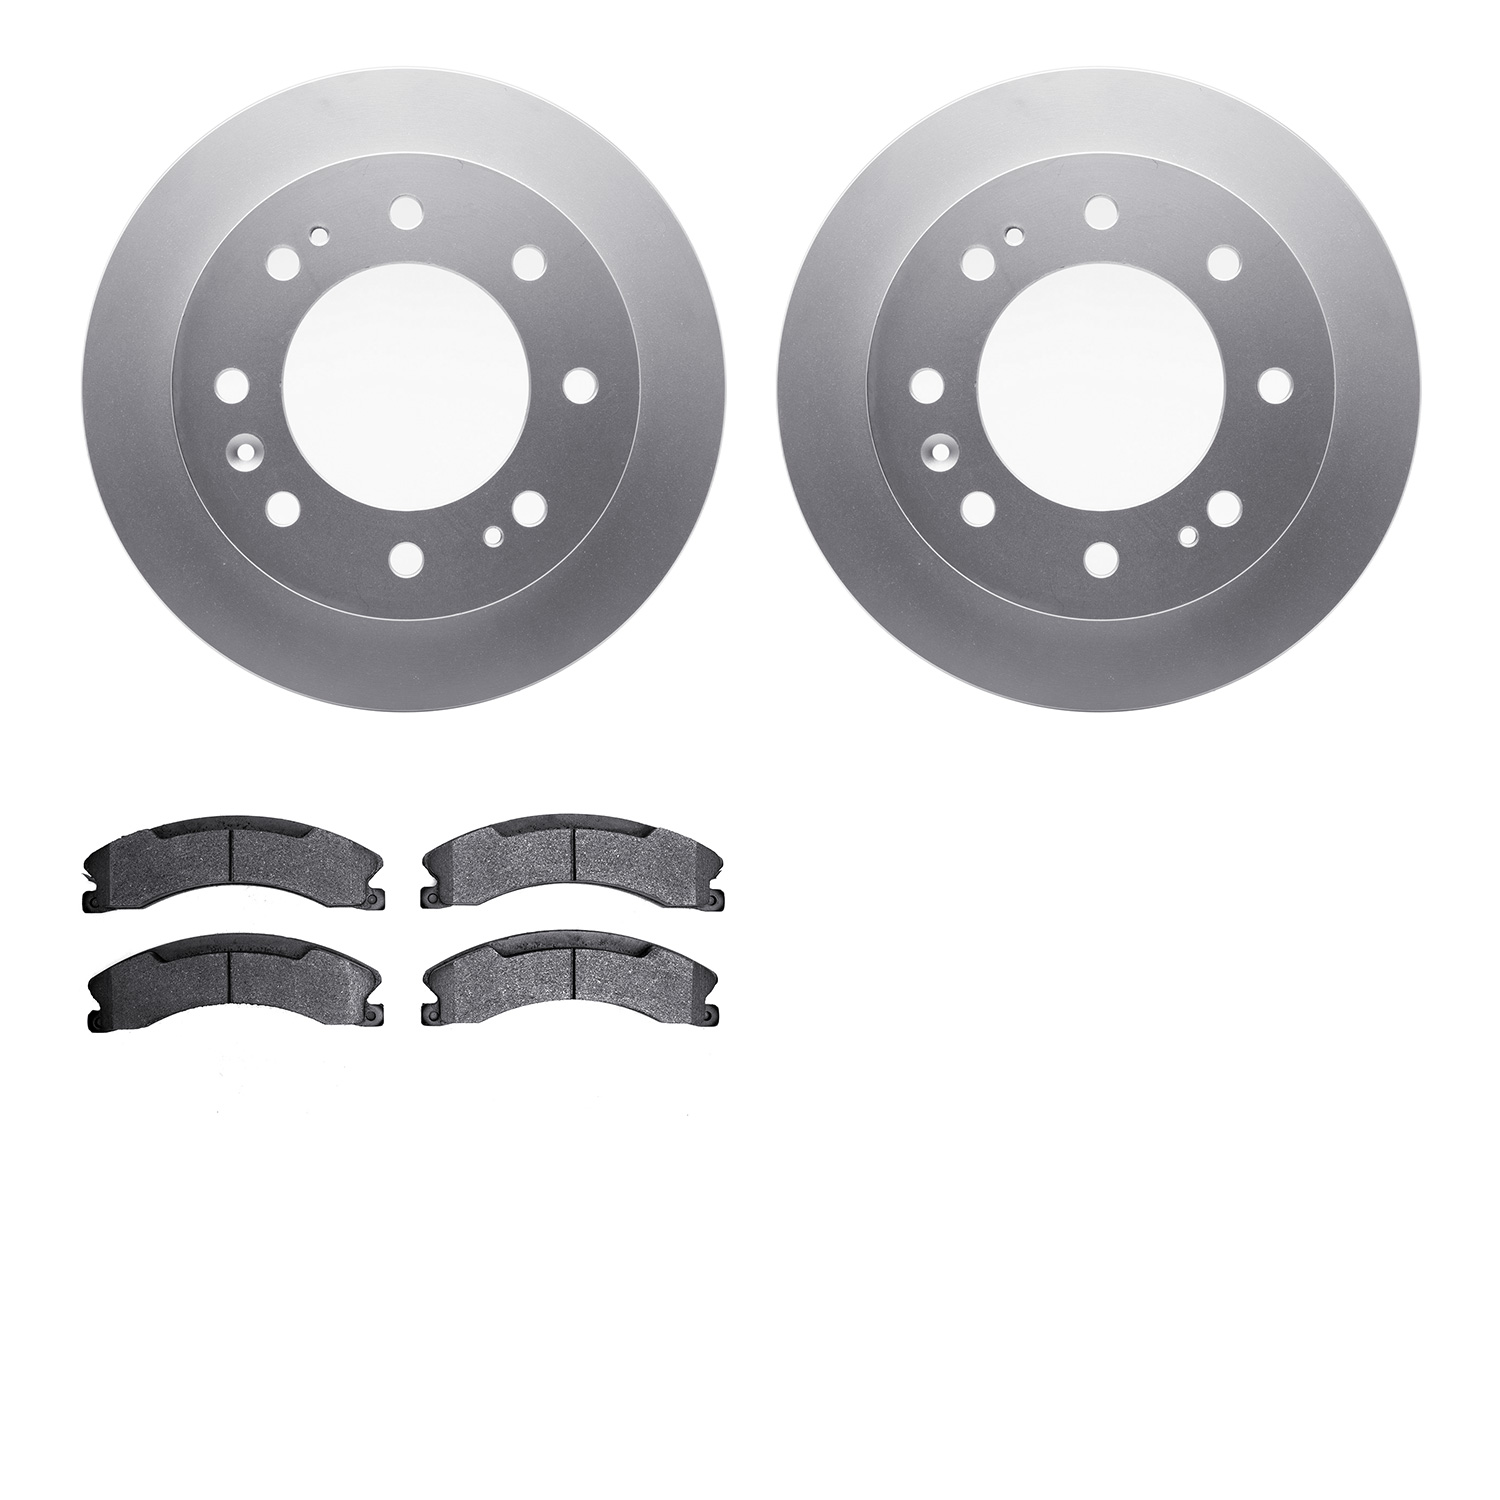 4402-48030 Geospec Brake Rotors with Ultimate-Duty Brake Pads Kit, 2011-2019 GM, Position: Front